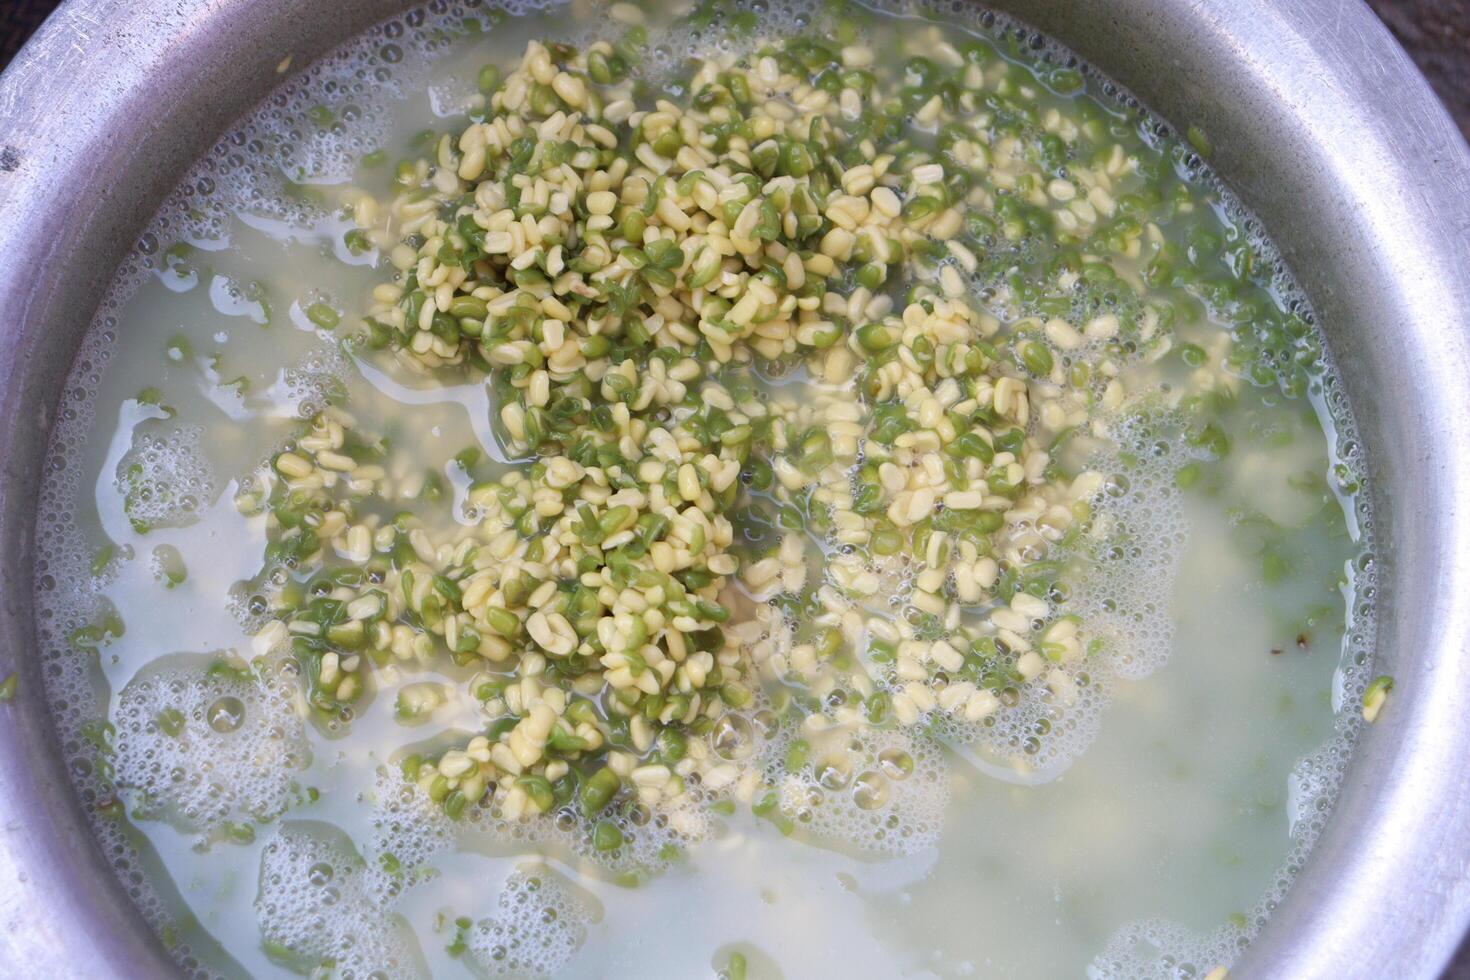 a bowl filled with green moong dal and other ingredients photo